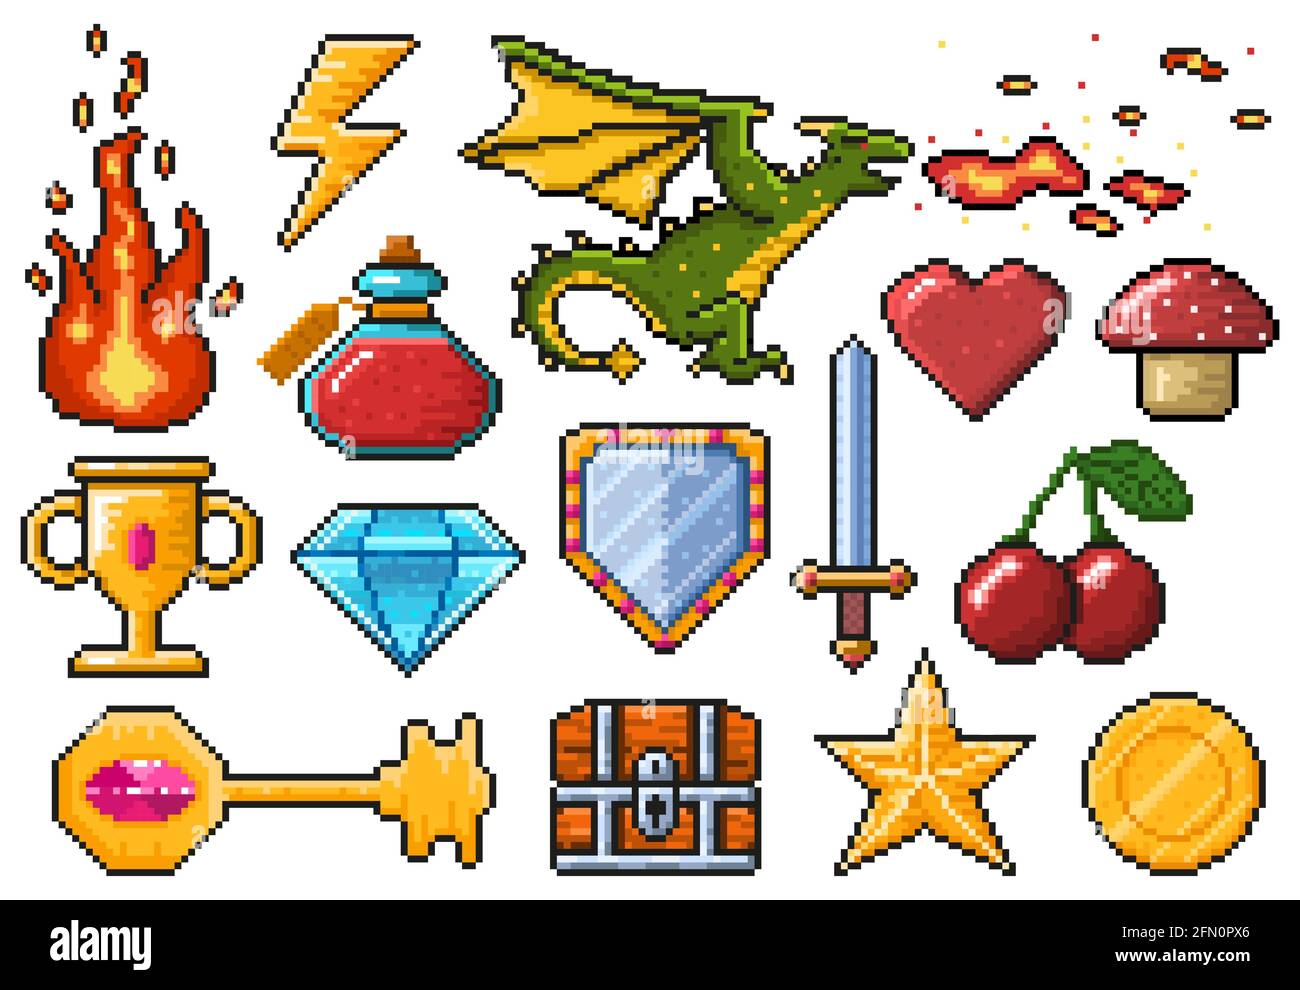 Pixel game elements. Games ui magic items, fire, trophy, coin, dragon and poison vector illustration set. Digital pixelated 8 bit game symbols Stock Vector